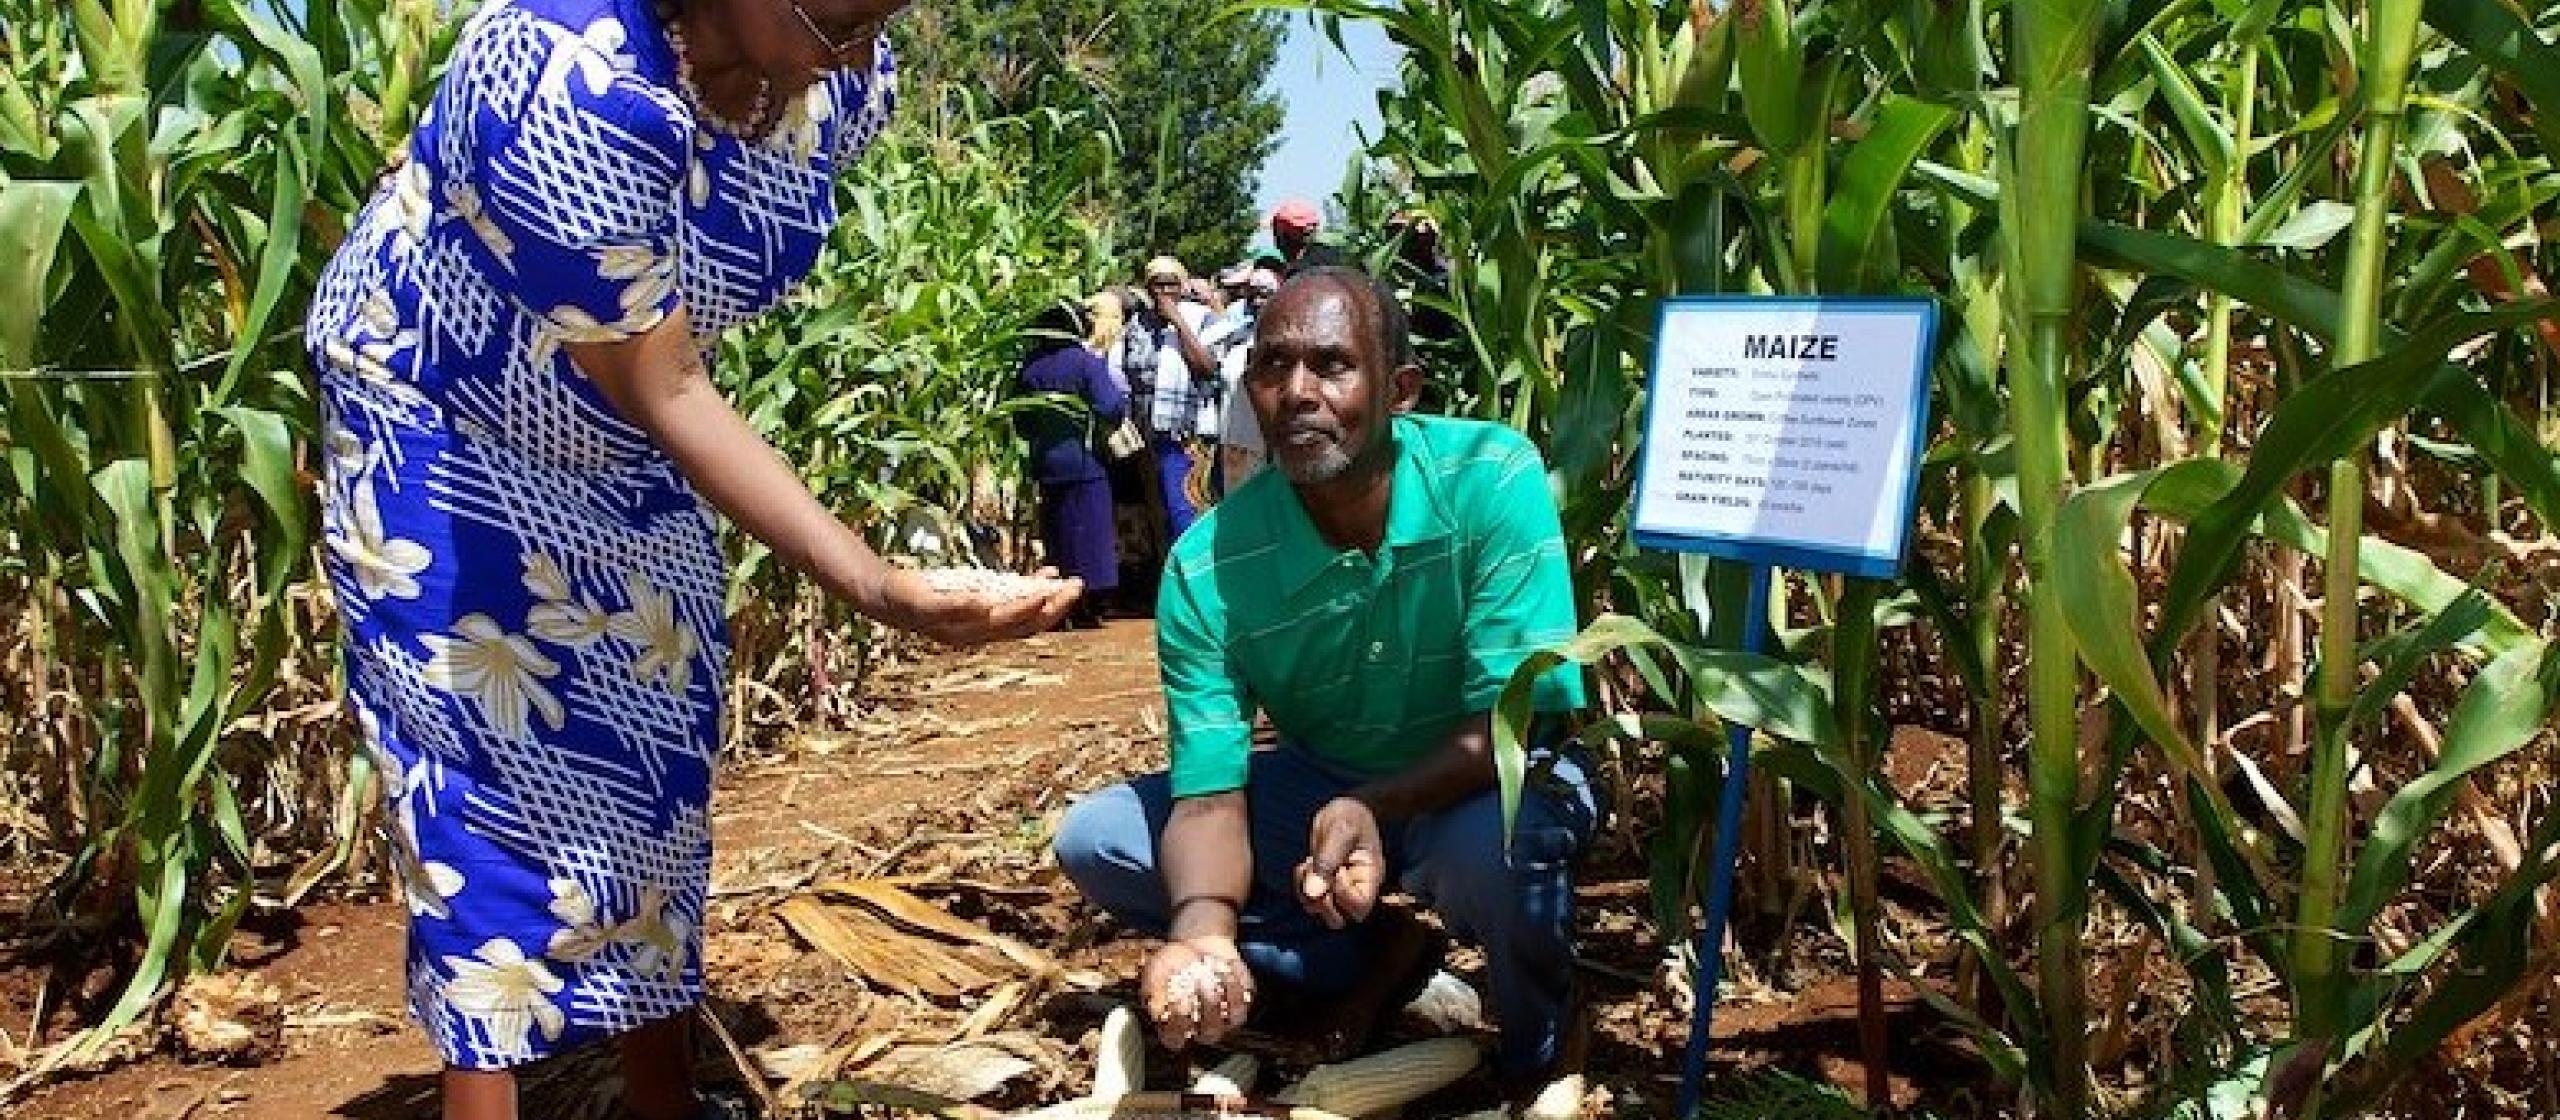 A farmer shows his harvested maize to a woman